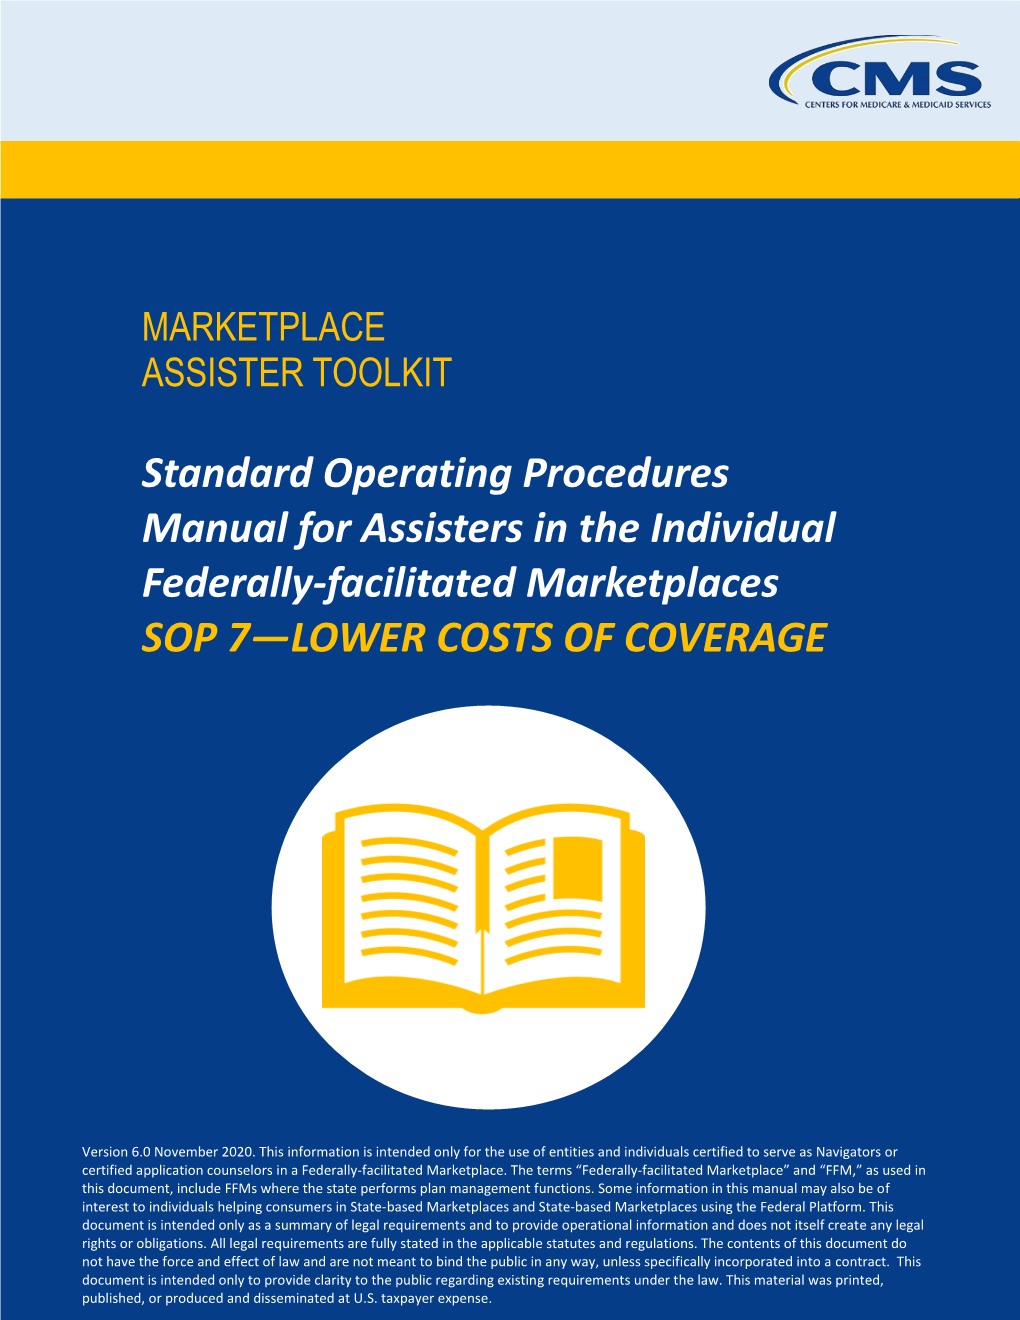 SOP-7. Lower Costs of Coverage